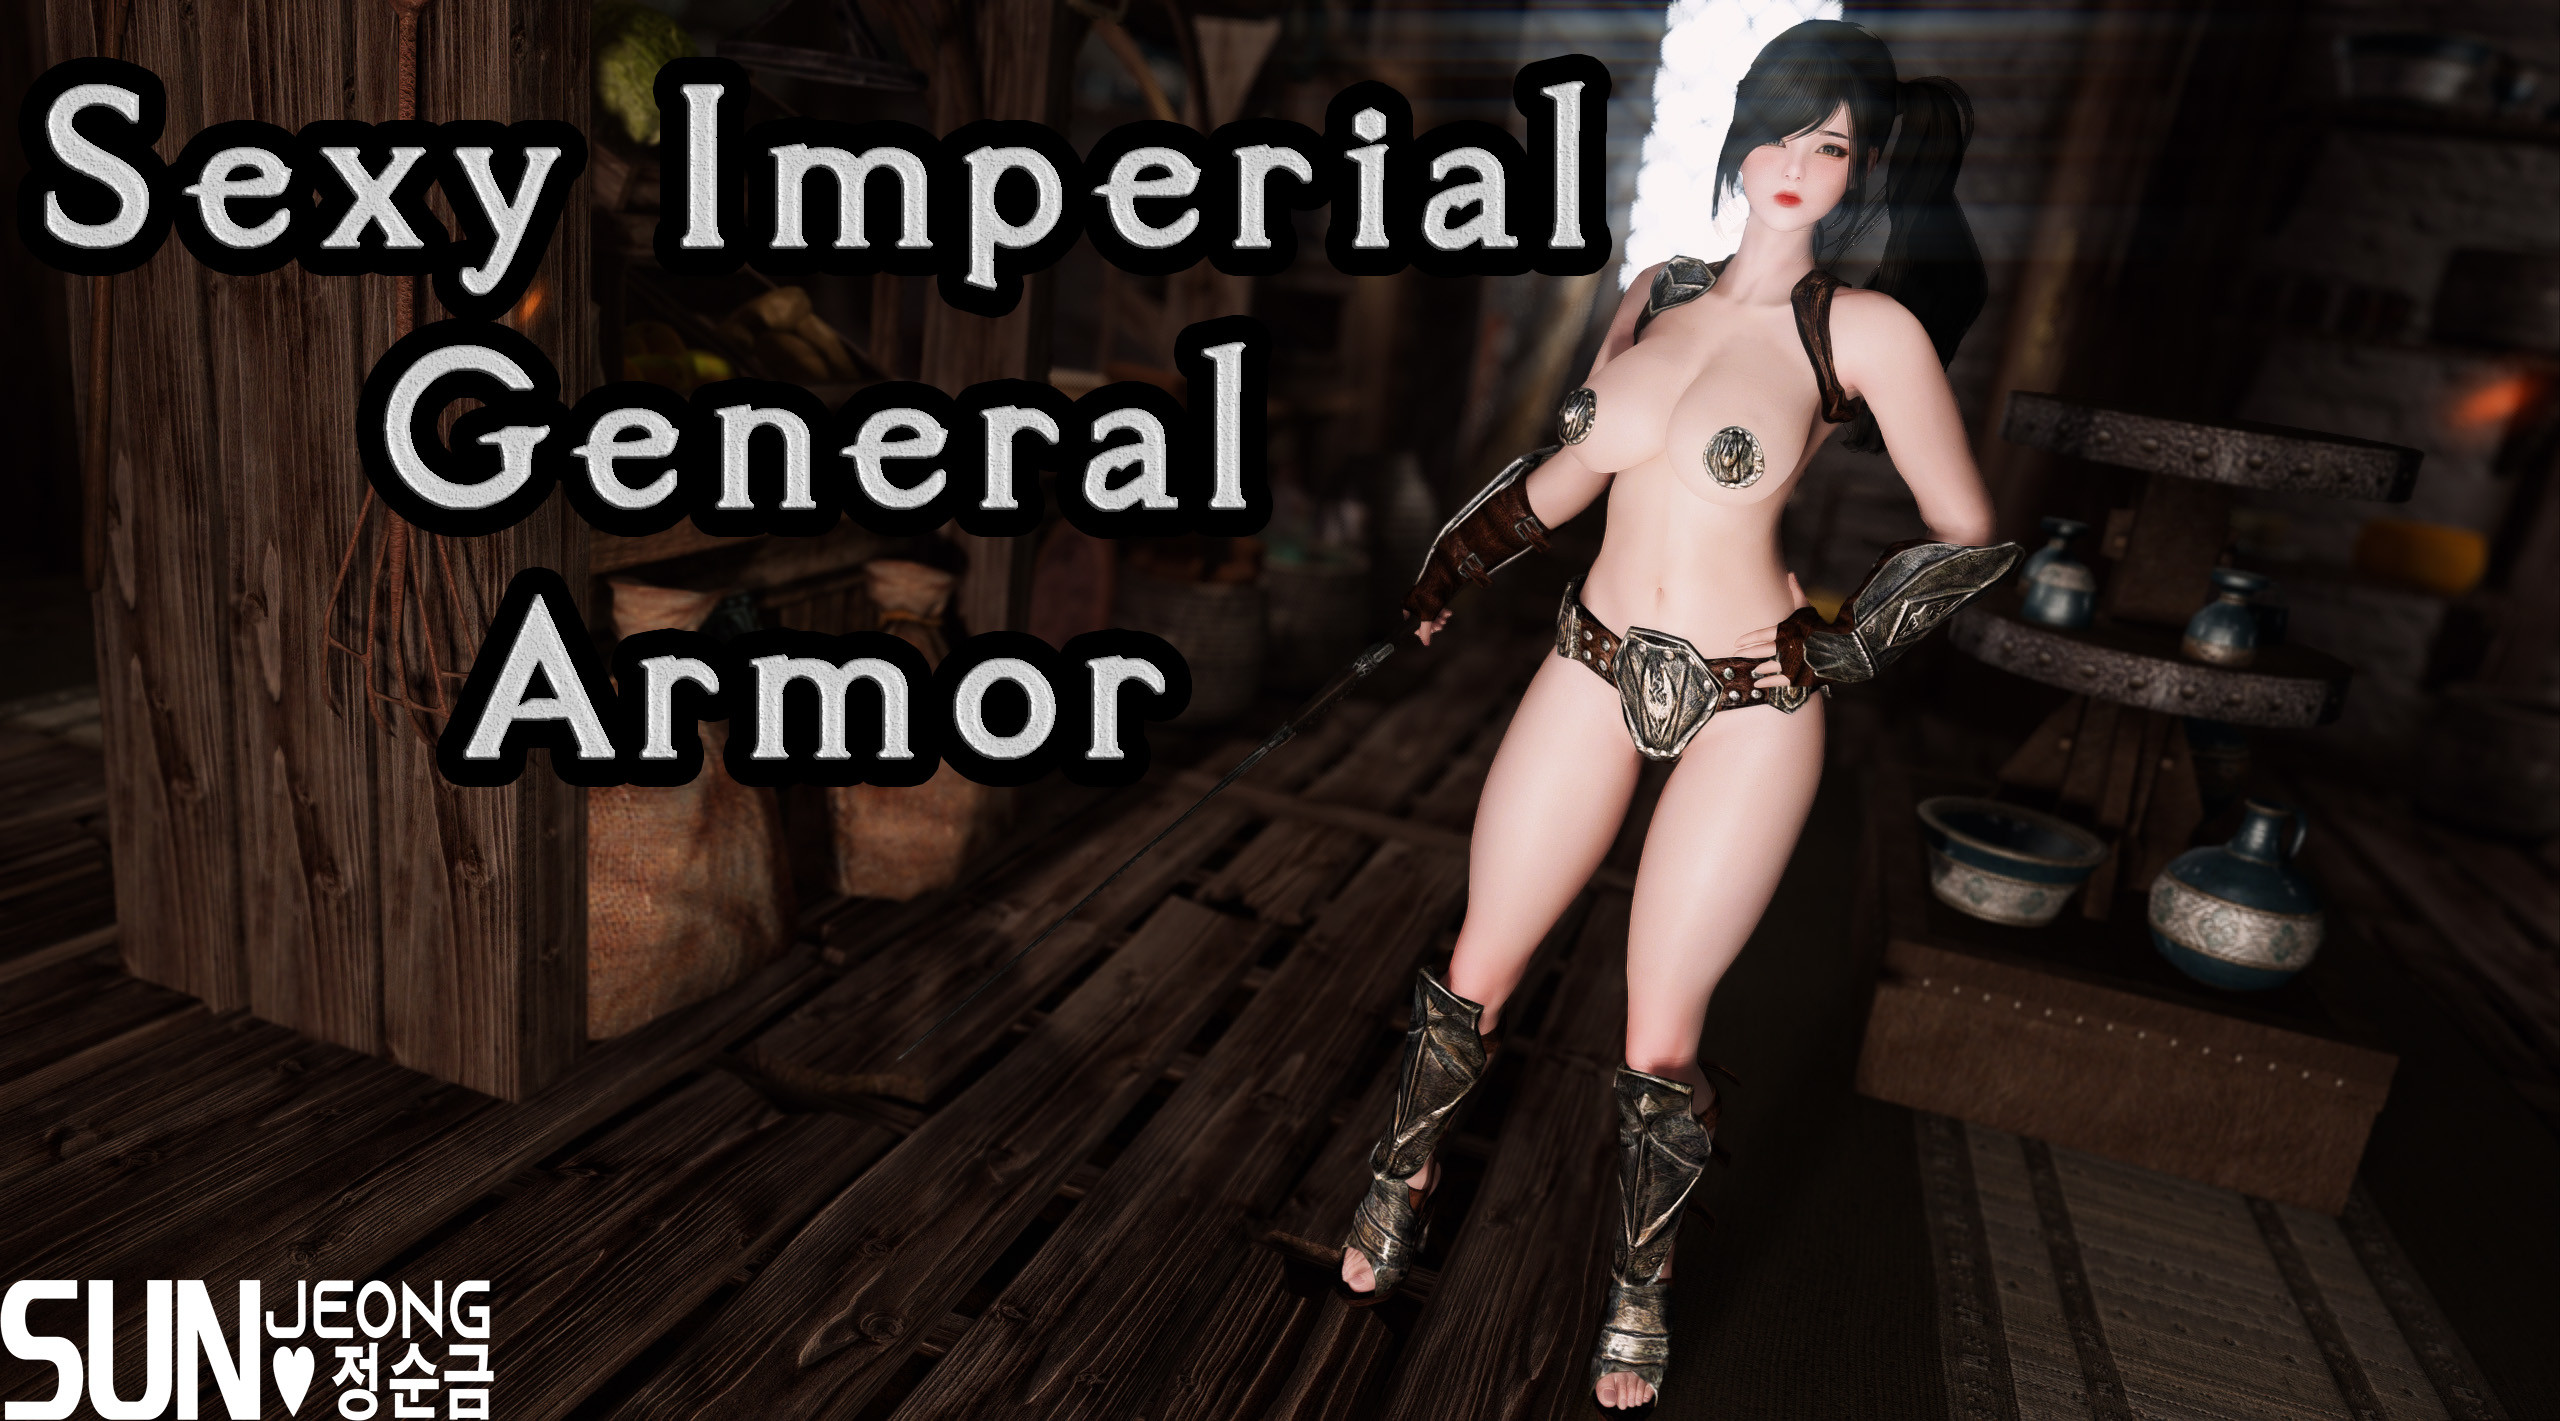 Sexy Imperial General Armor